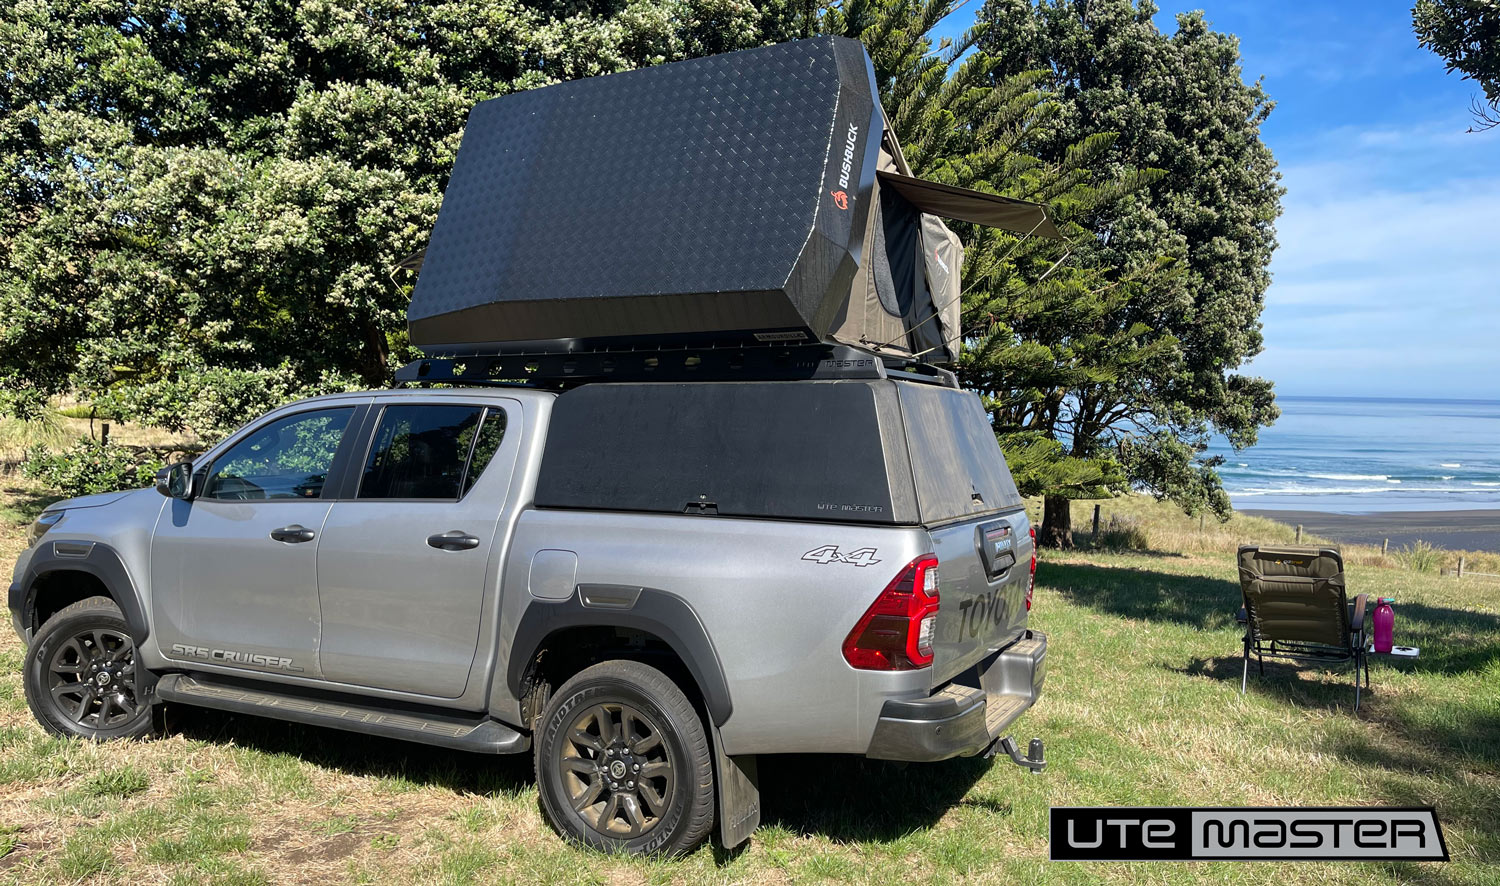 Utemaster Centurion Ute Canopy to suit Toyota Hilux with Roof Top Tent